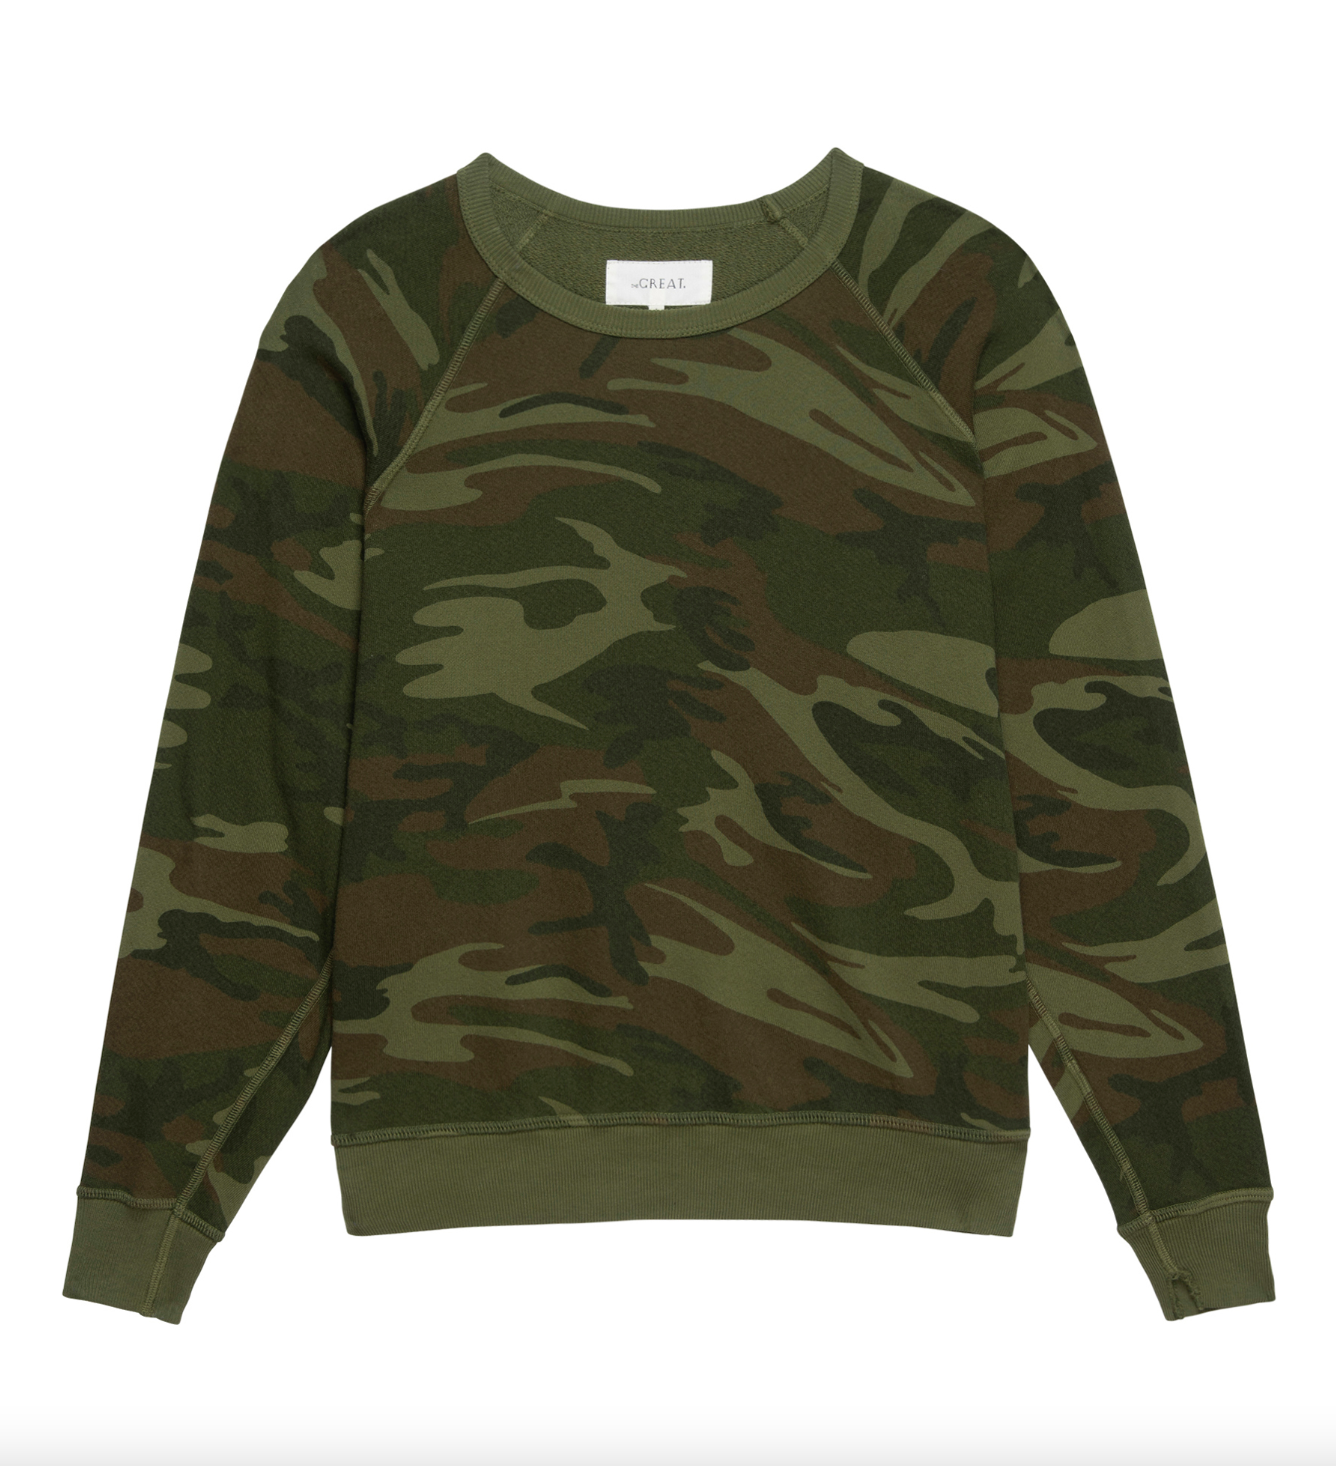 A camouflage-style sweatshirt with long sleeves and a crew neck, featuring shades of green, brown, and black. The label at the neckline shows the brand &quot;The Great Inc.